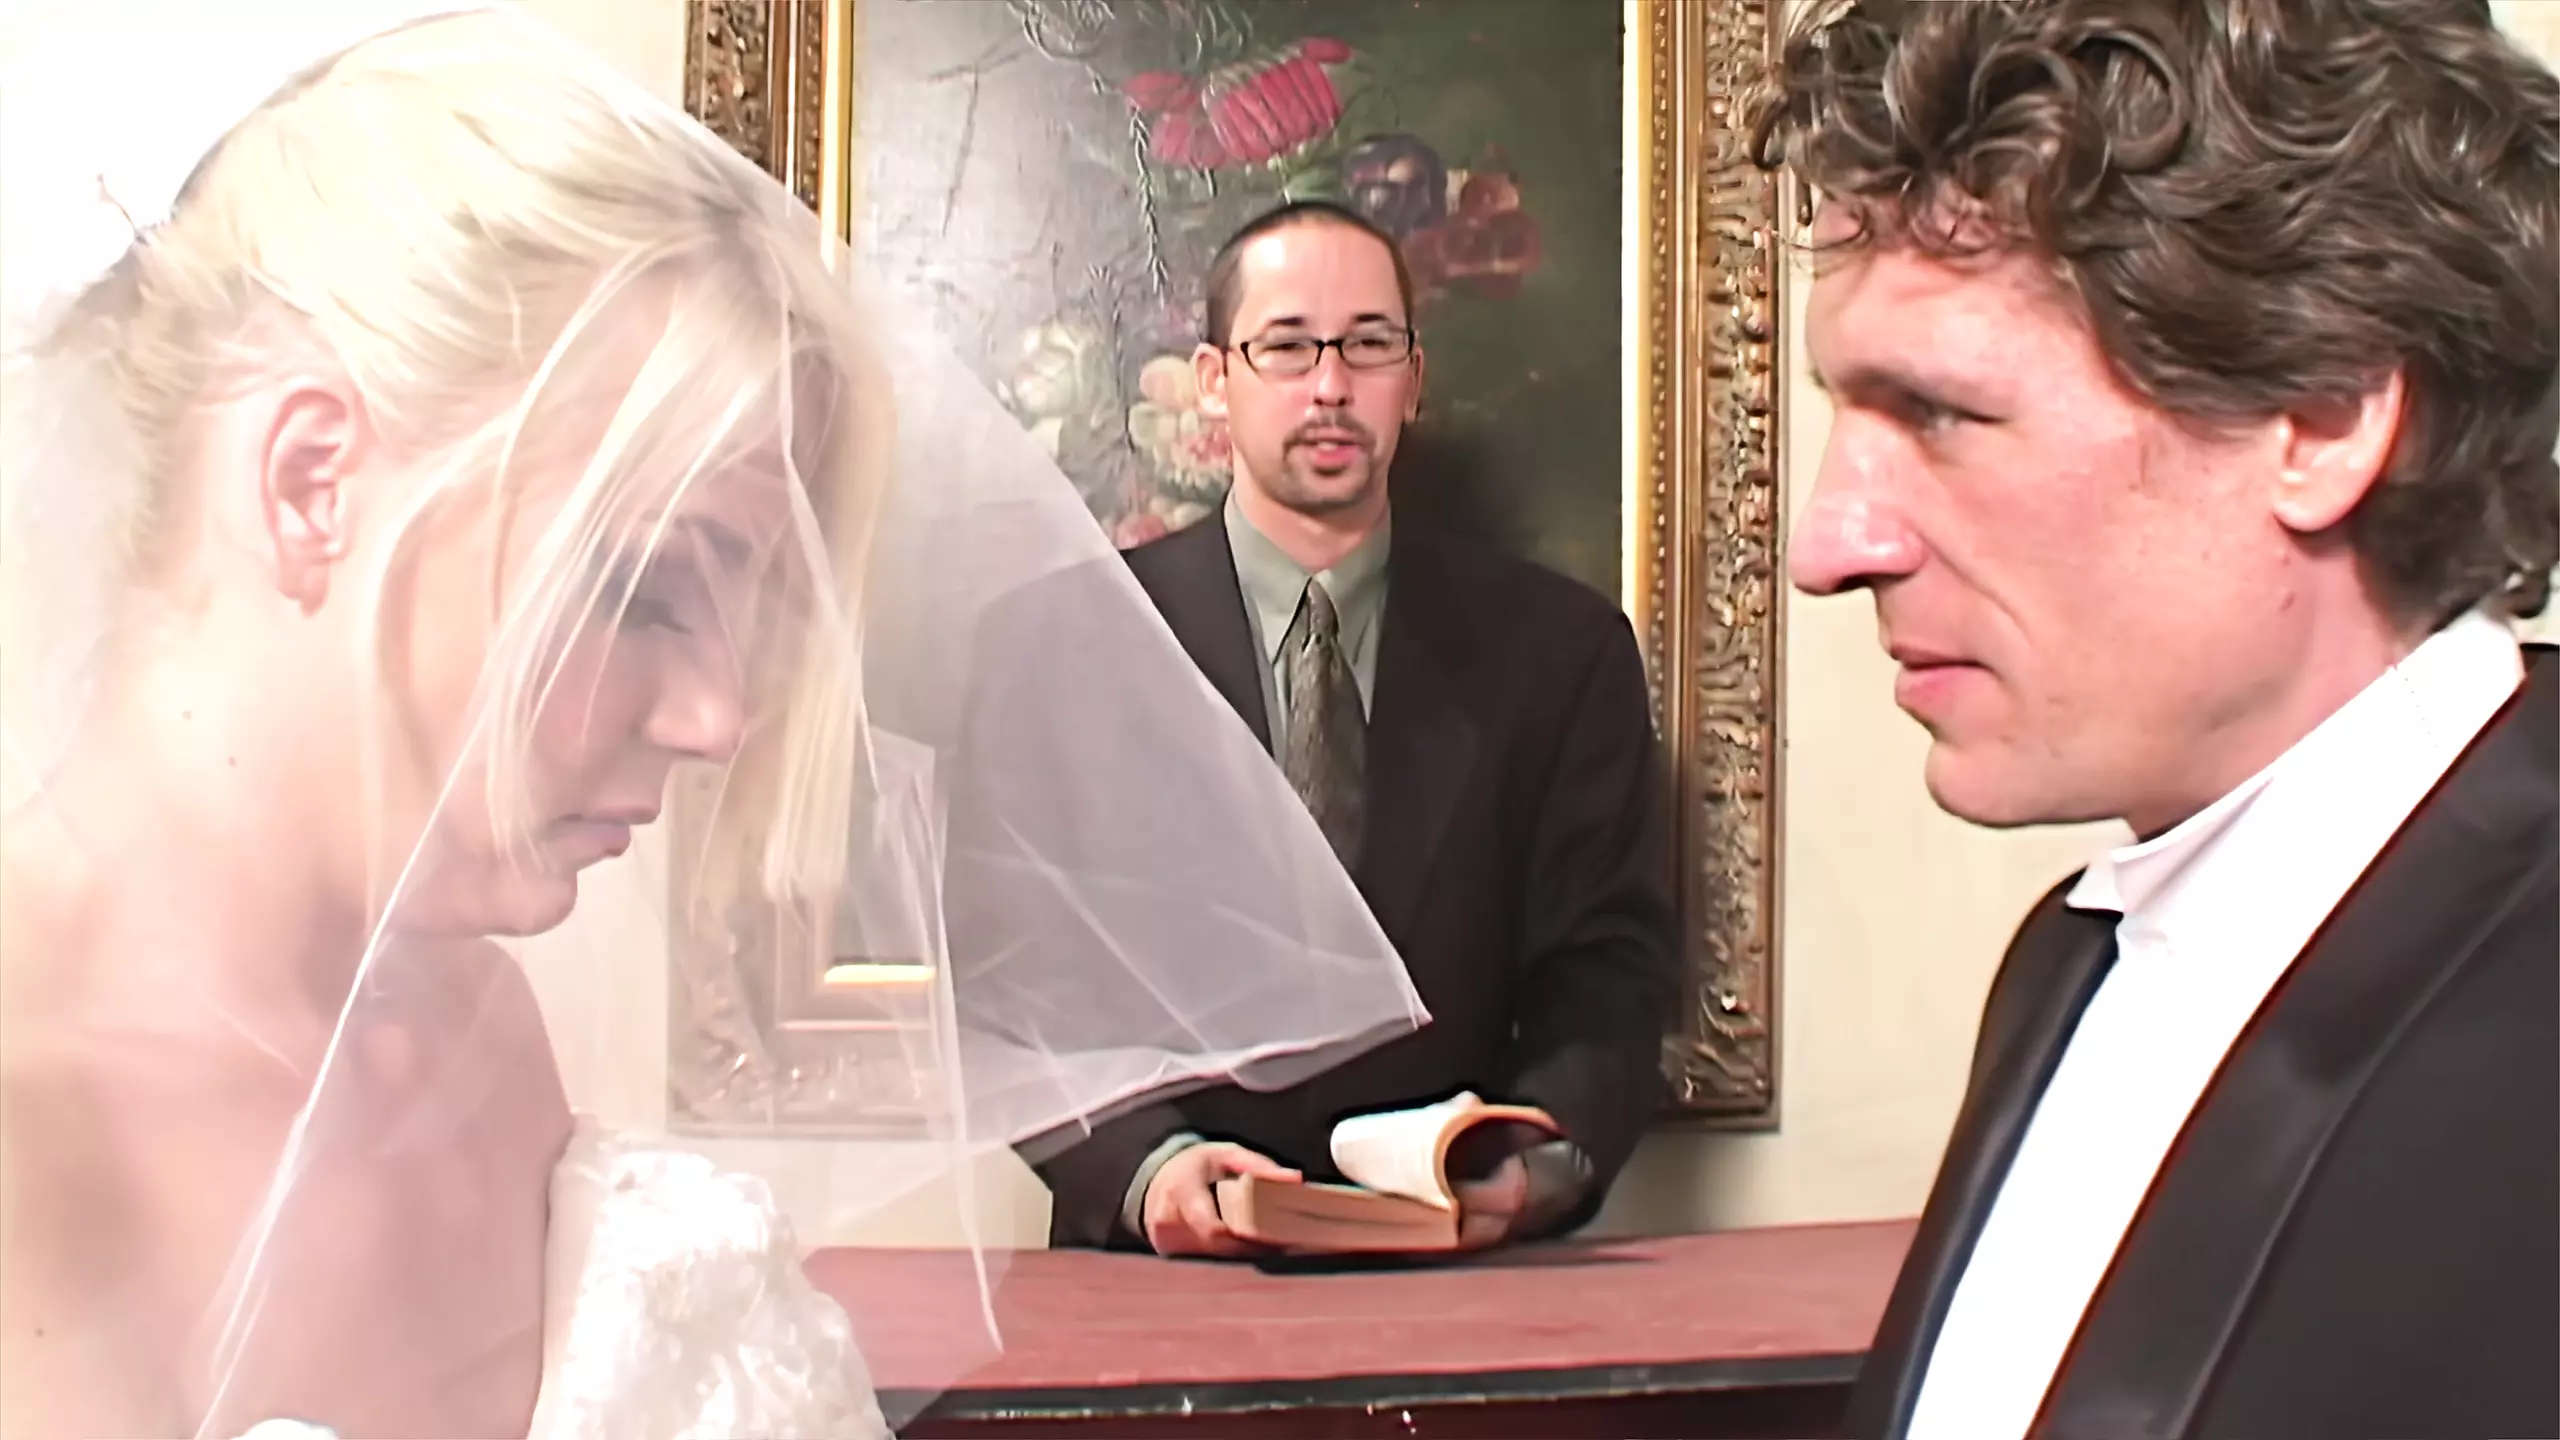 Pervert Husband Lets Newly Married Wife In Wedding Night Get Fucked By Two Latex Strangers